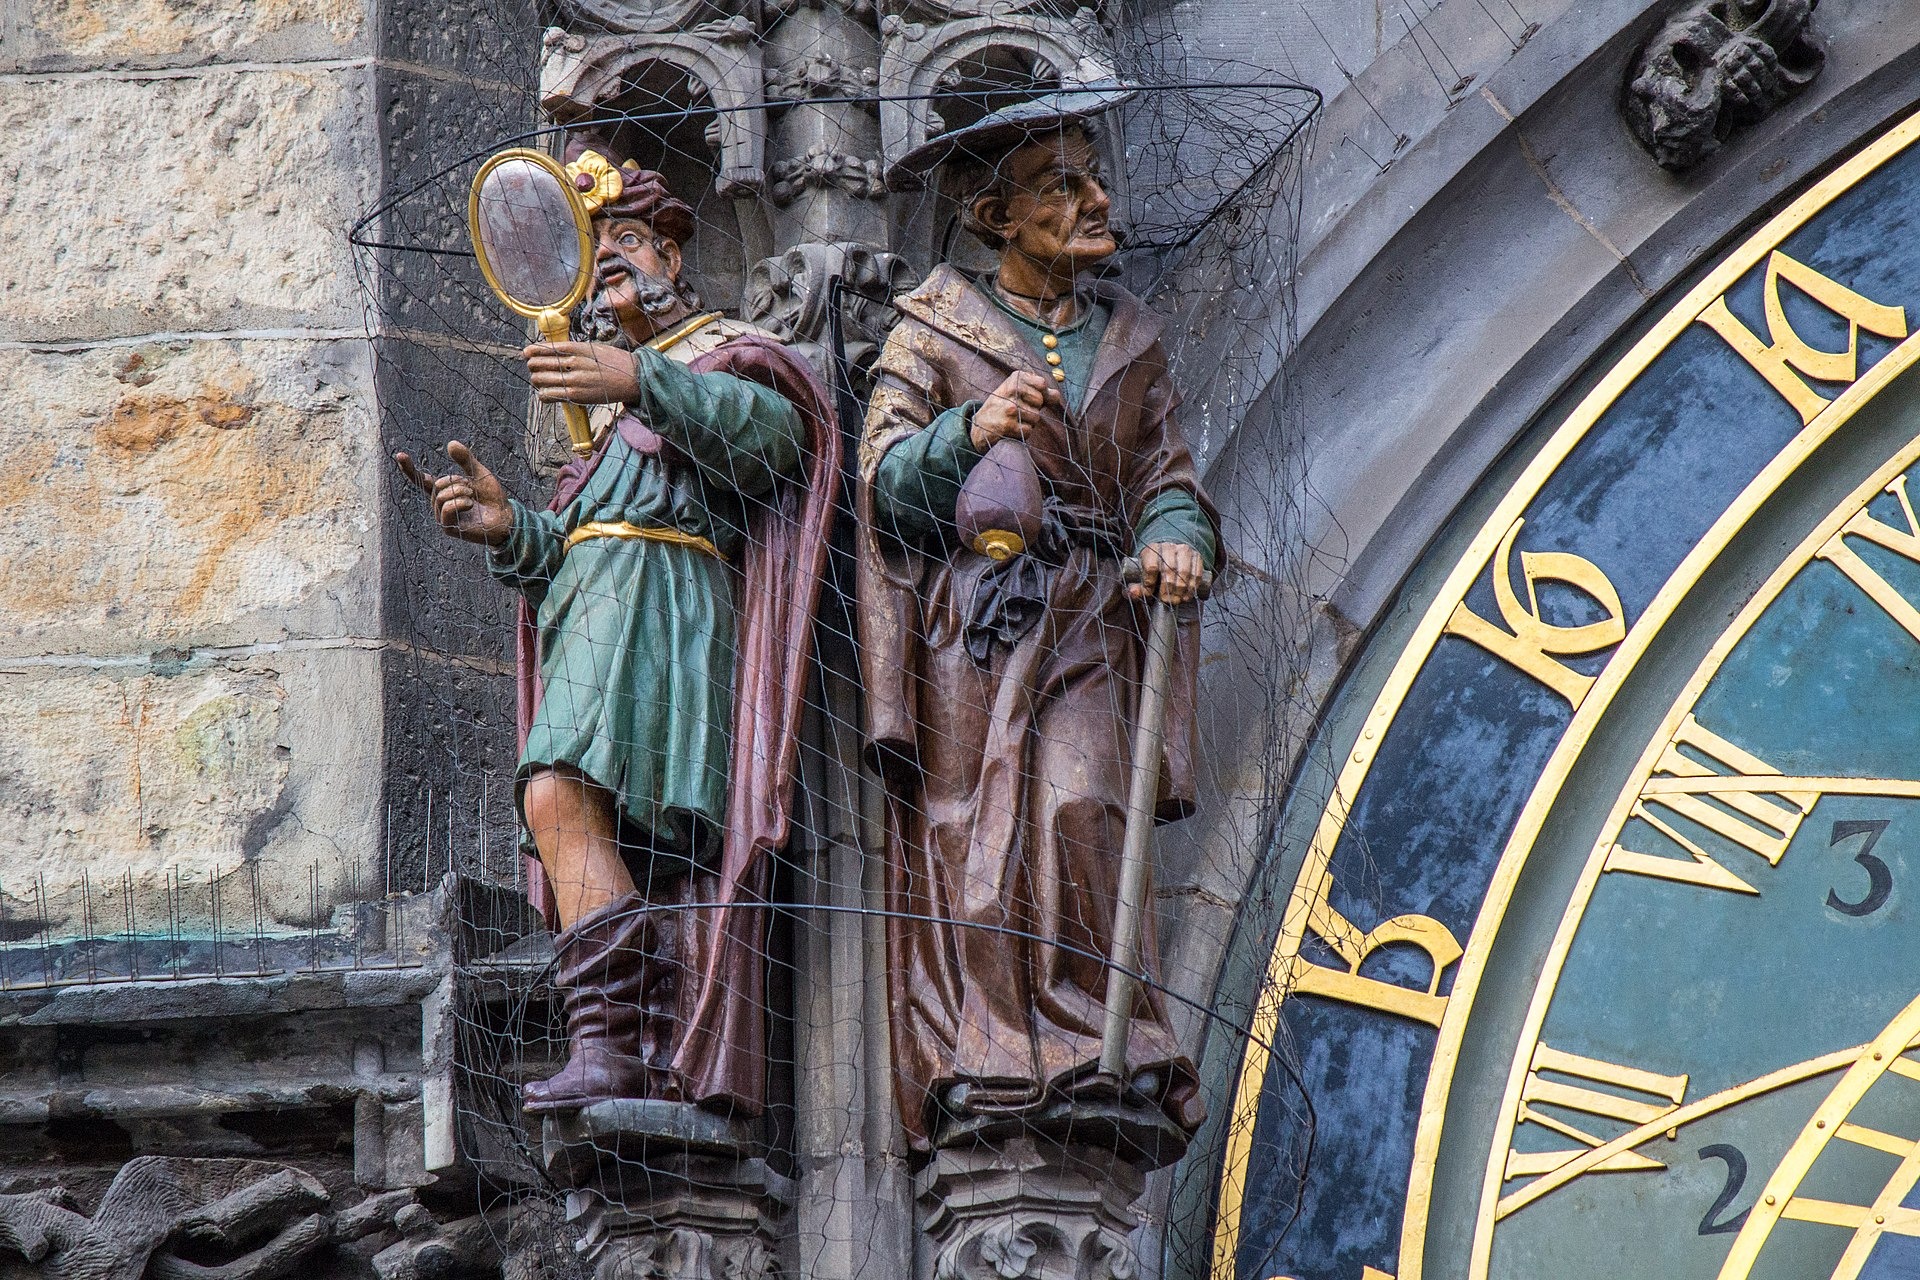 Statues representing Vanity and Avarice on the Prague astronomical clock